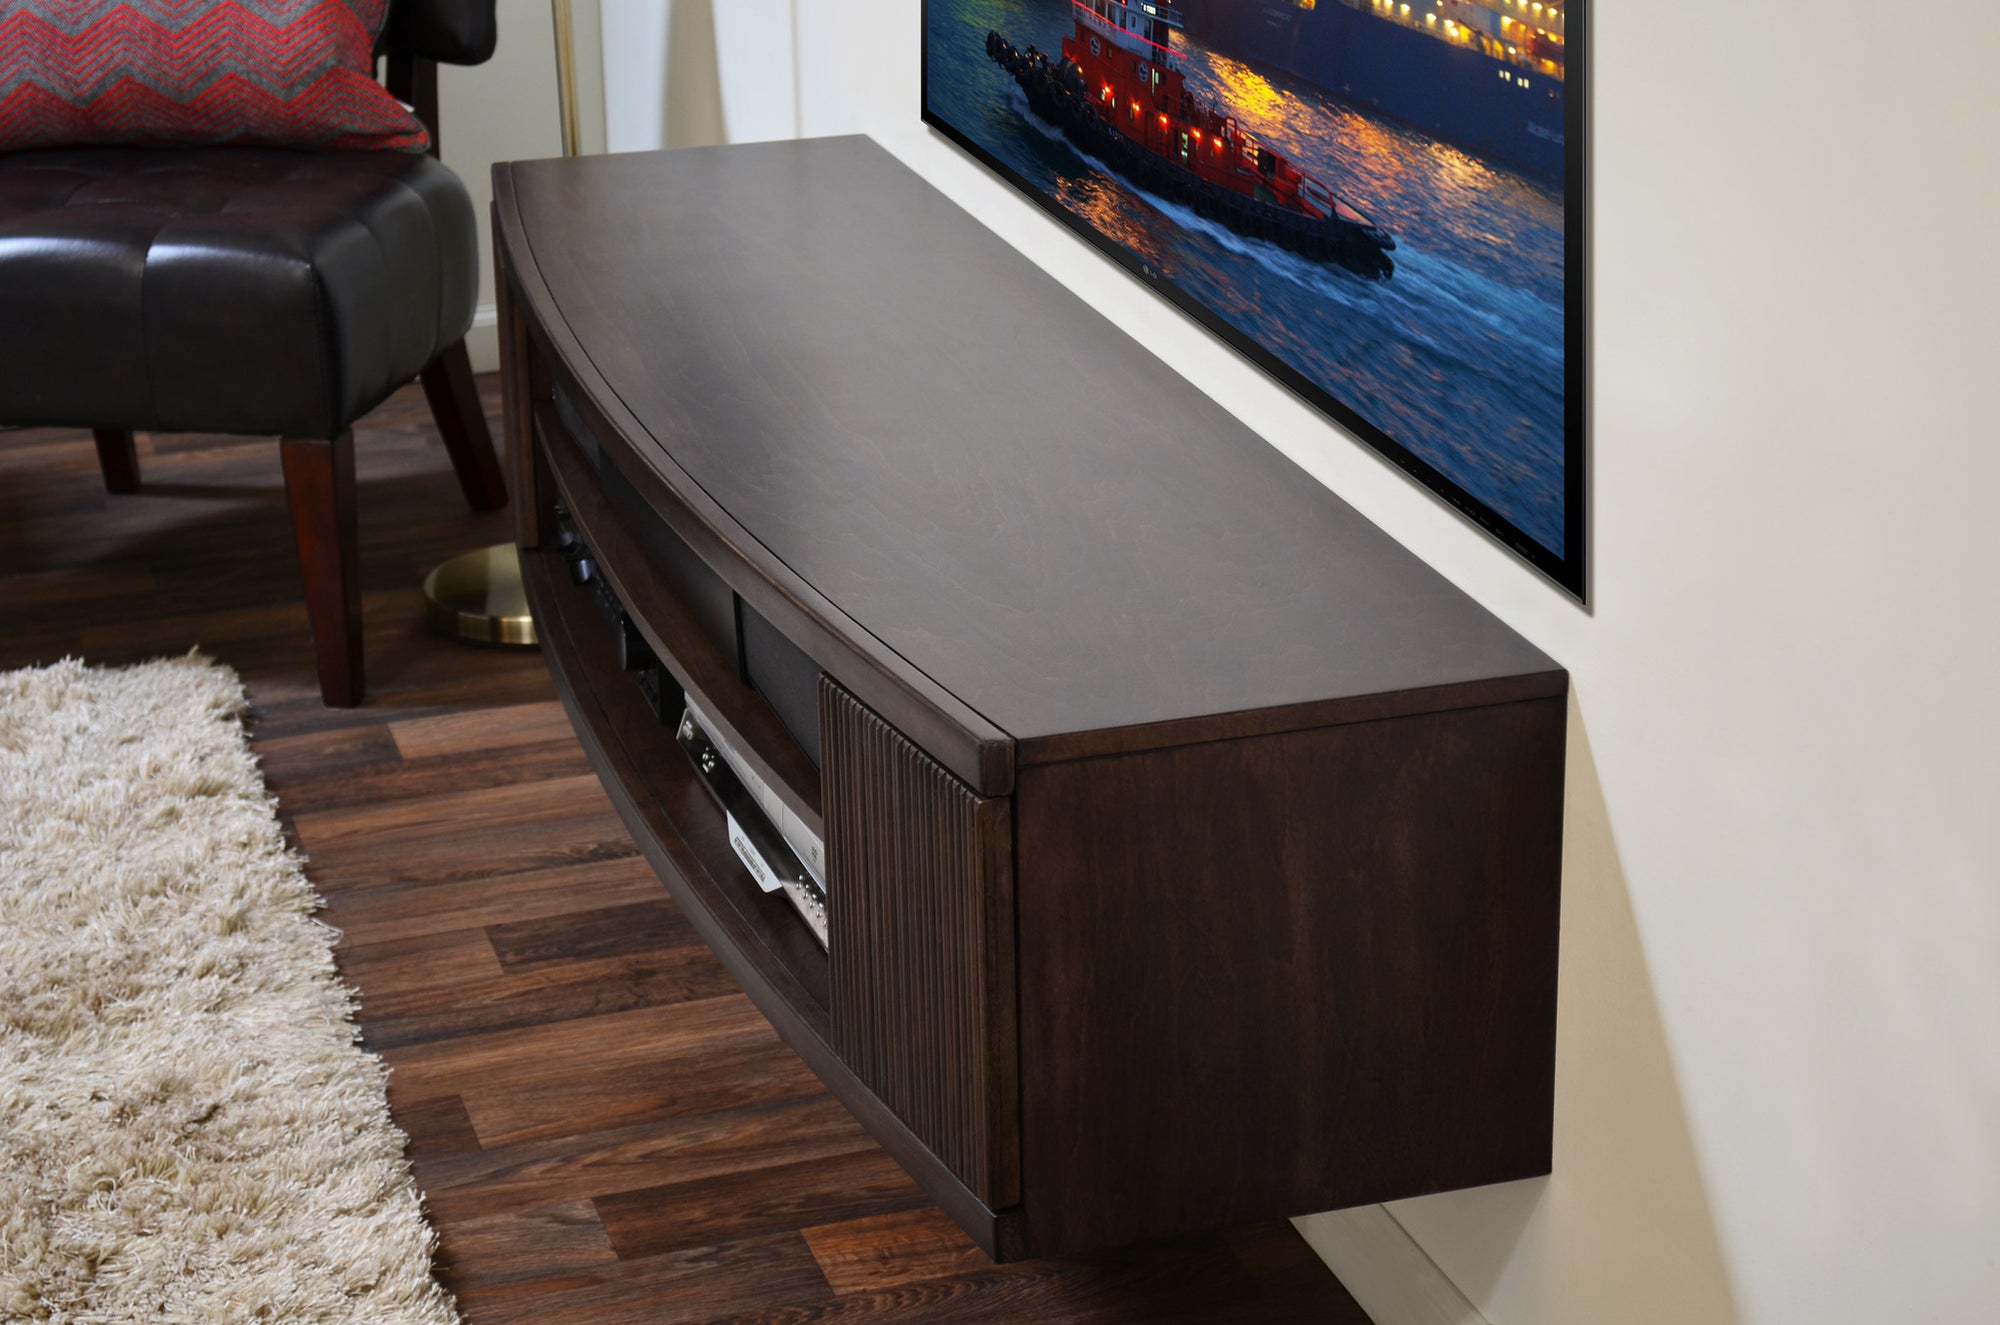 Curved Wall Mount TV Stand - The Curve - Espresso - OB 50% OFF!